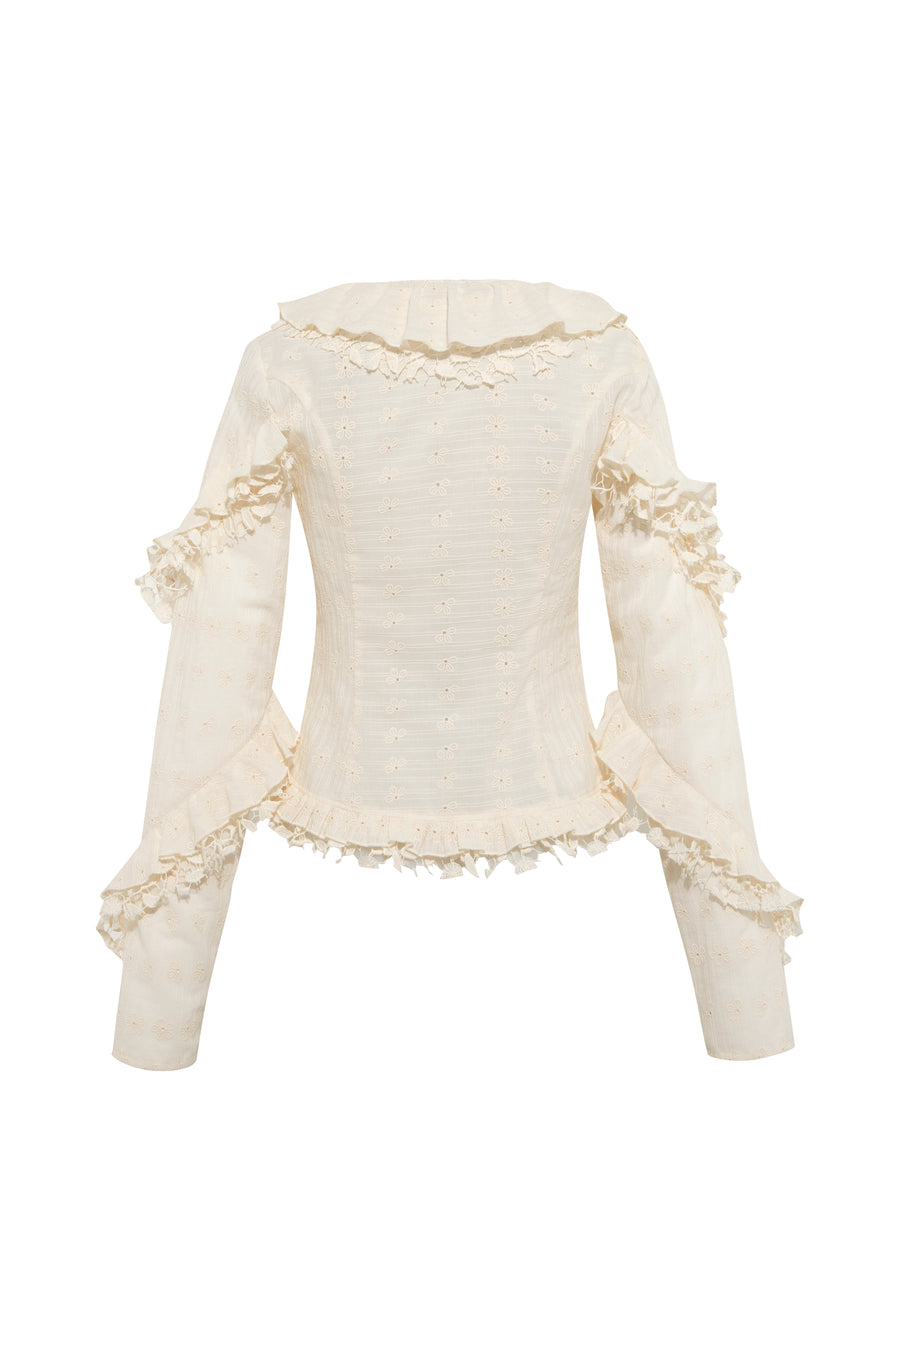 CARLY - Lace and ruffle detailed long sleeved top